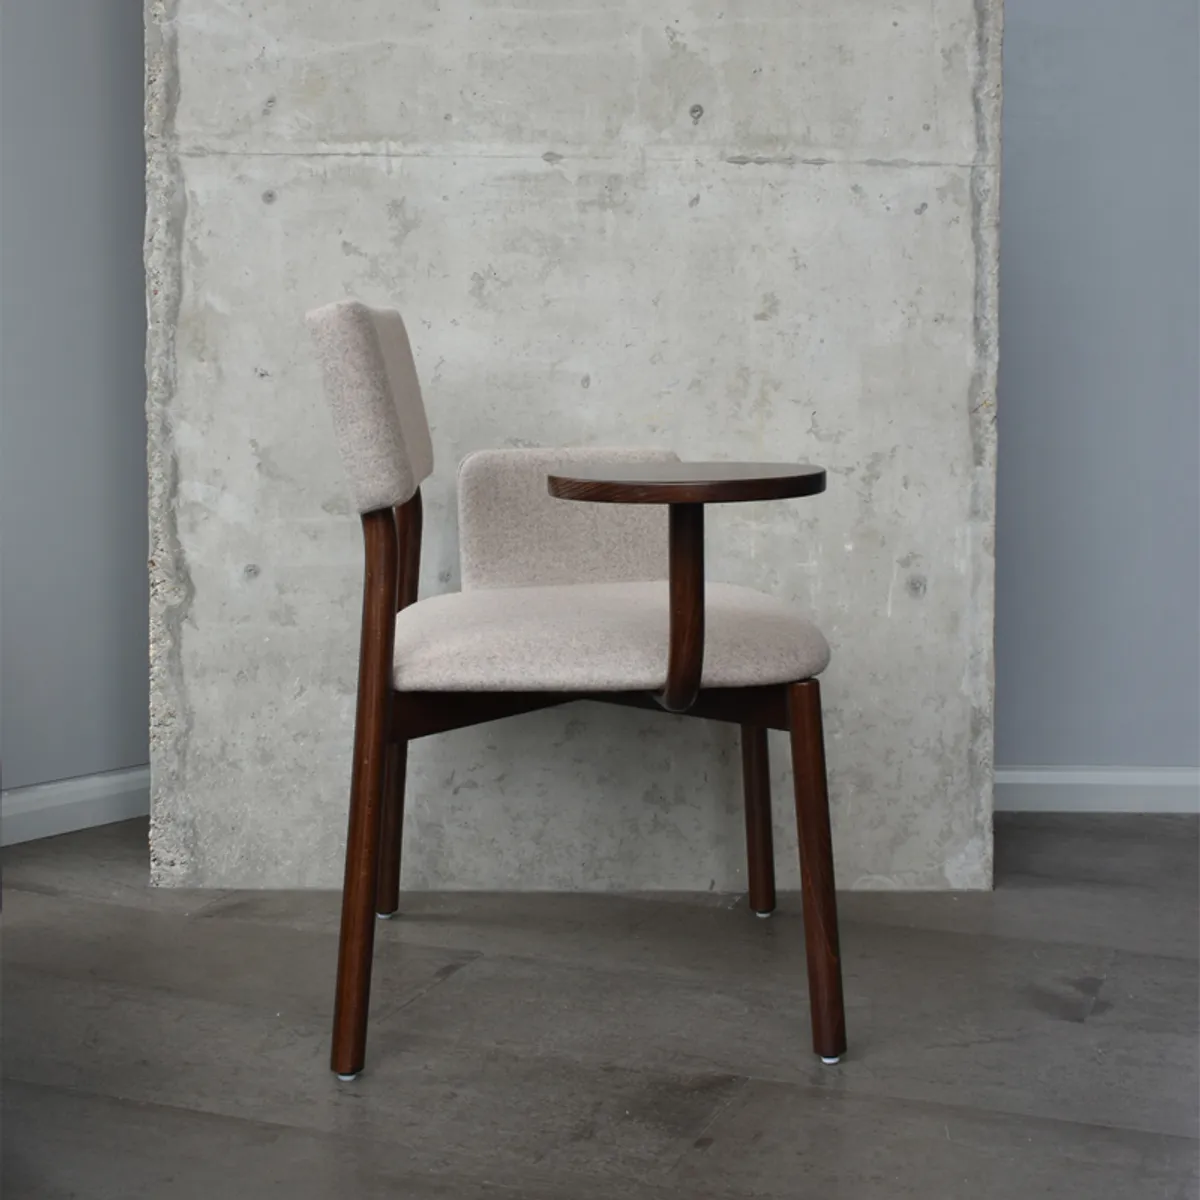 Scuelle Chair New Furniture From Milan 2019 By Inside Out Contracts 010